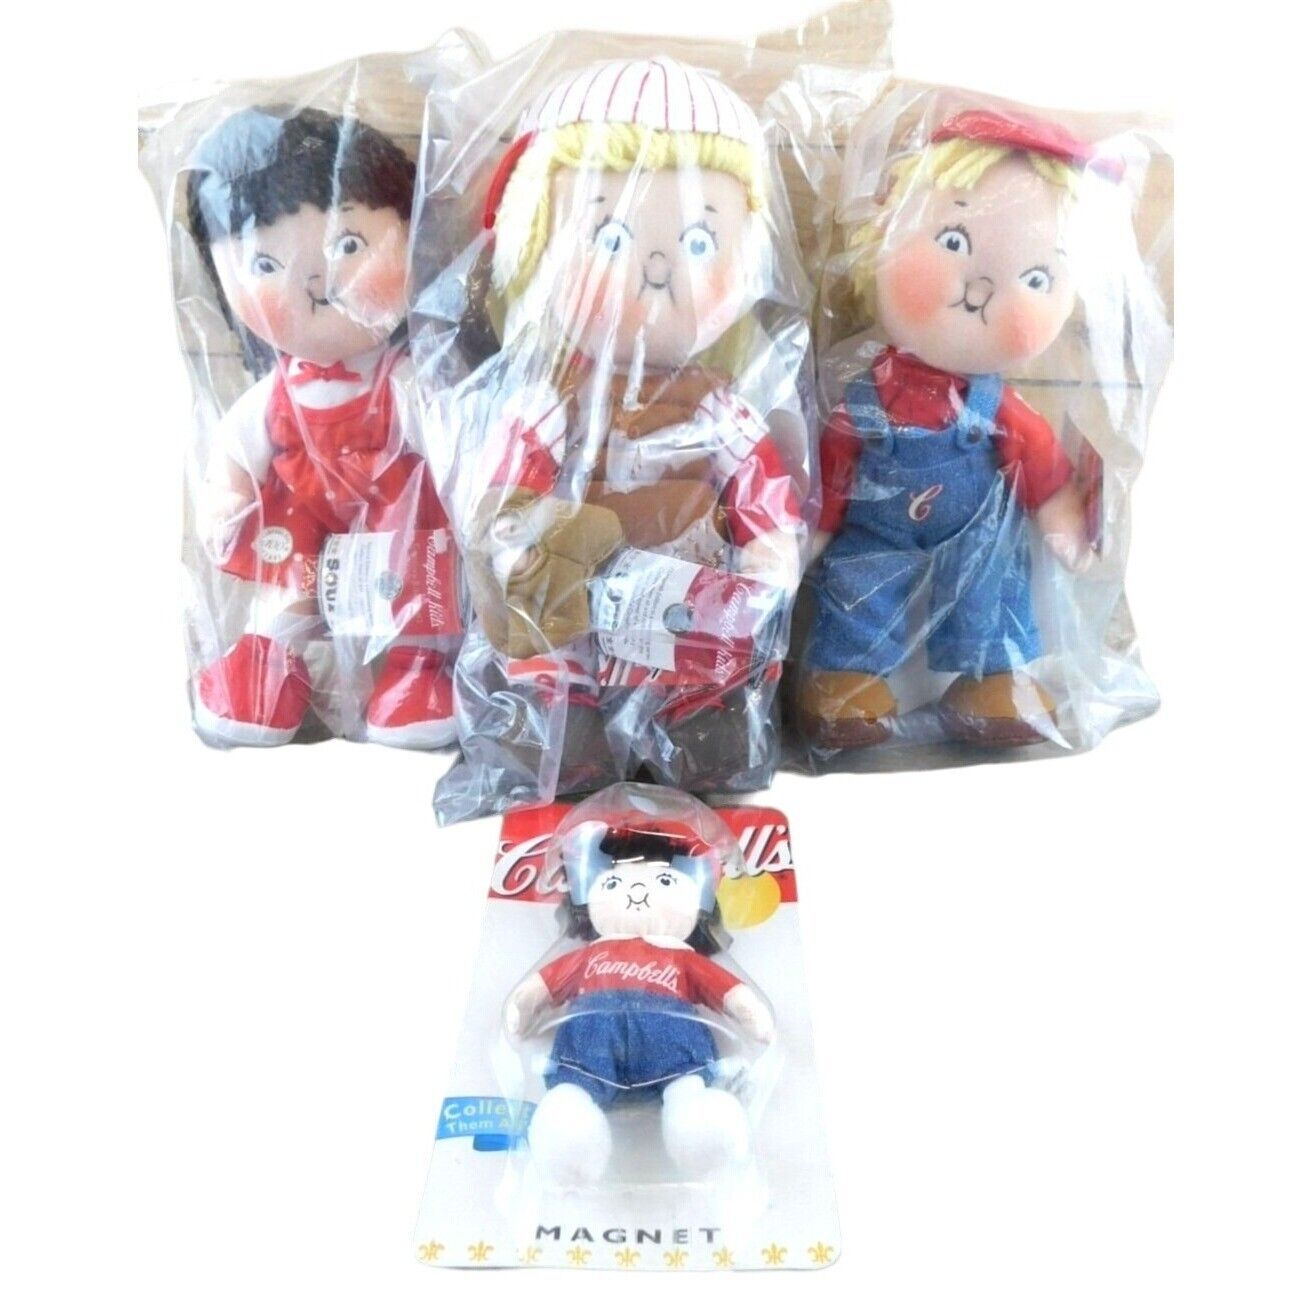 Lot of 3 Campbell Kids Cloth Dolls and Cloth Magnet SEALED 2002 2004 Baseball